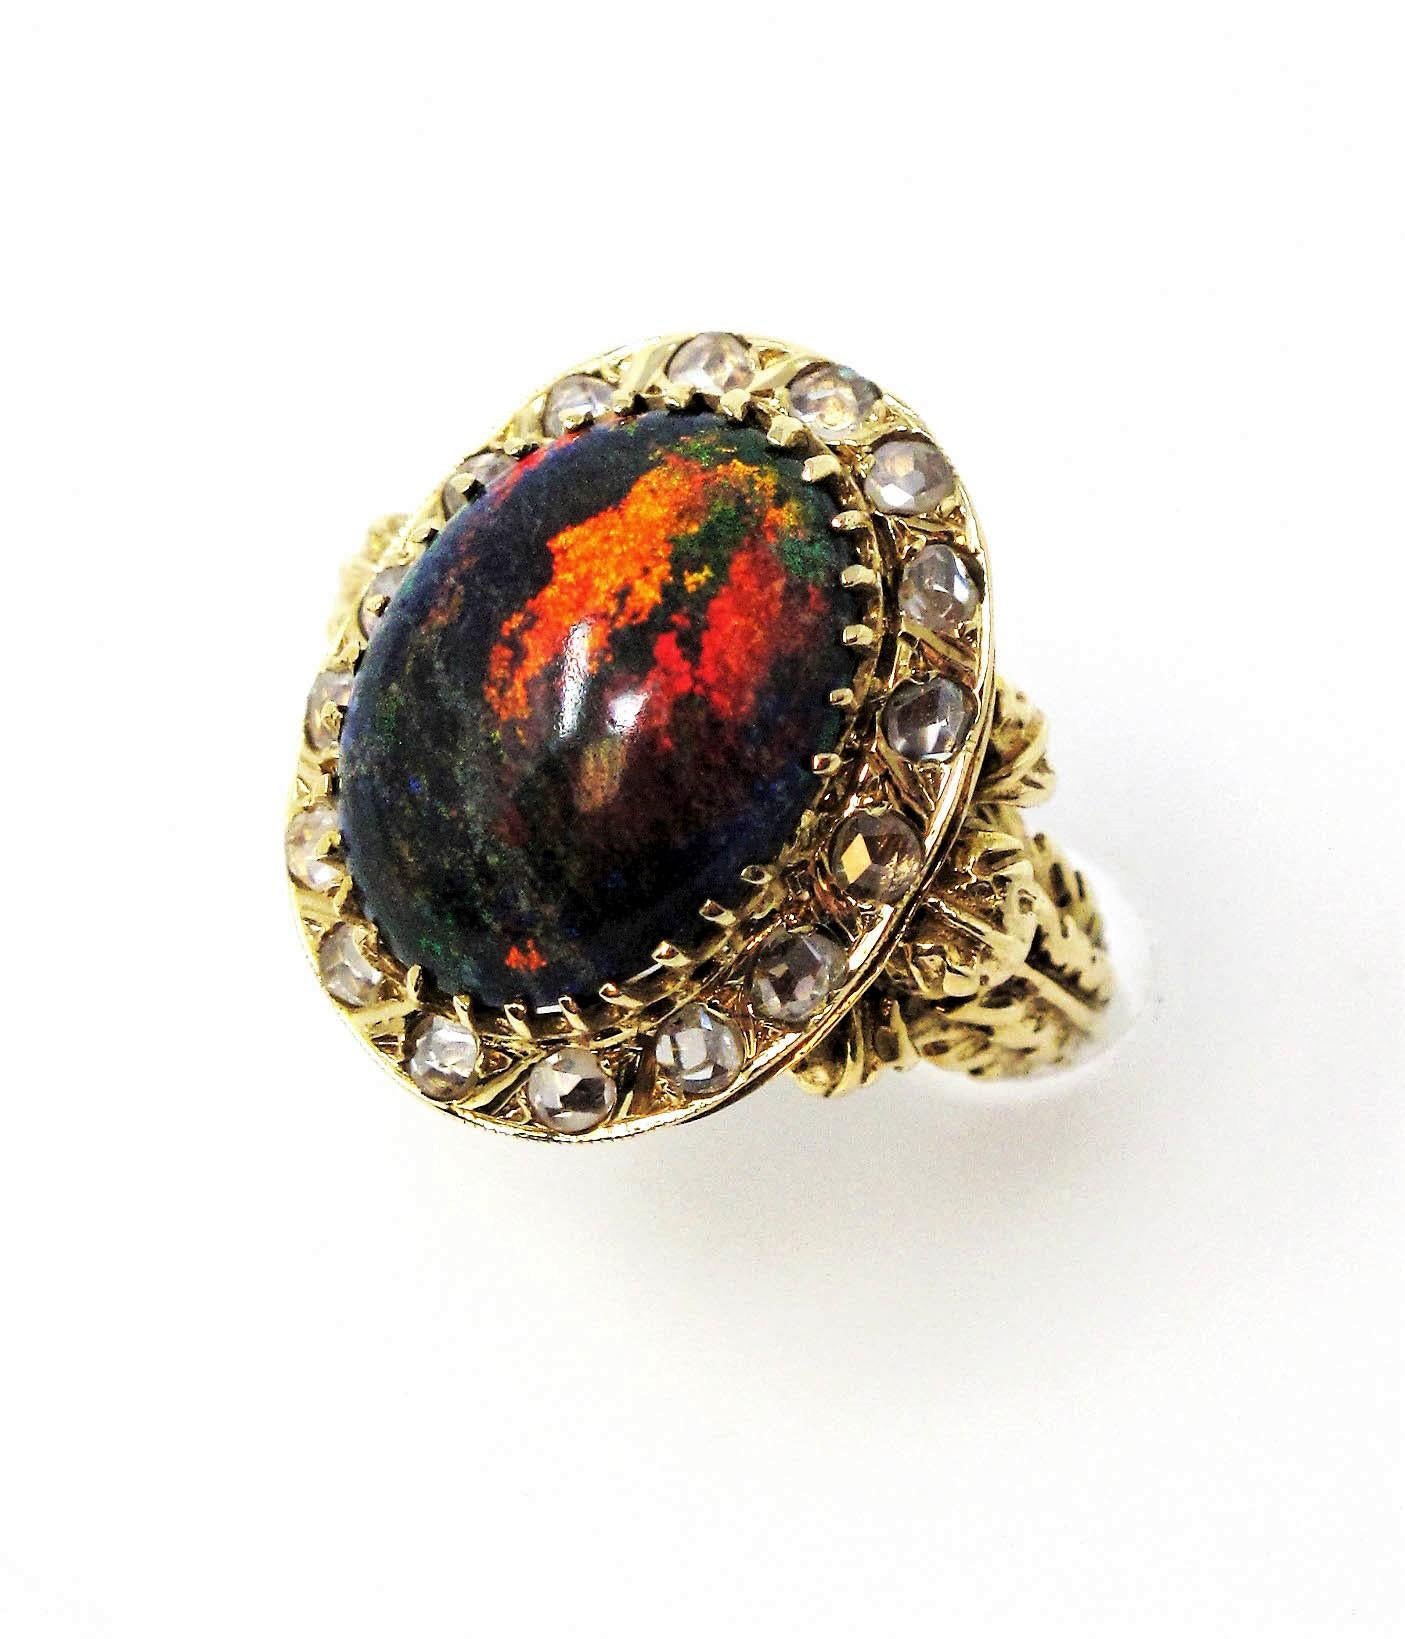 9.21 Carat Oval Cabochon Black Opal and Diamond Halo Cocktail Ring 14 Karat Gold For Sale 1